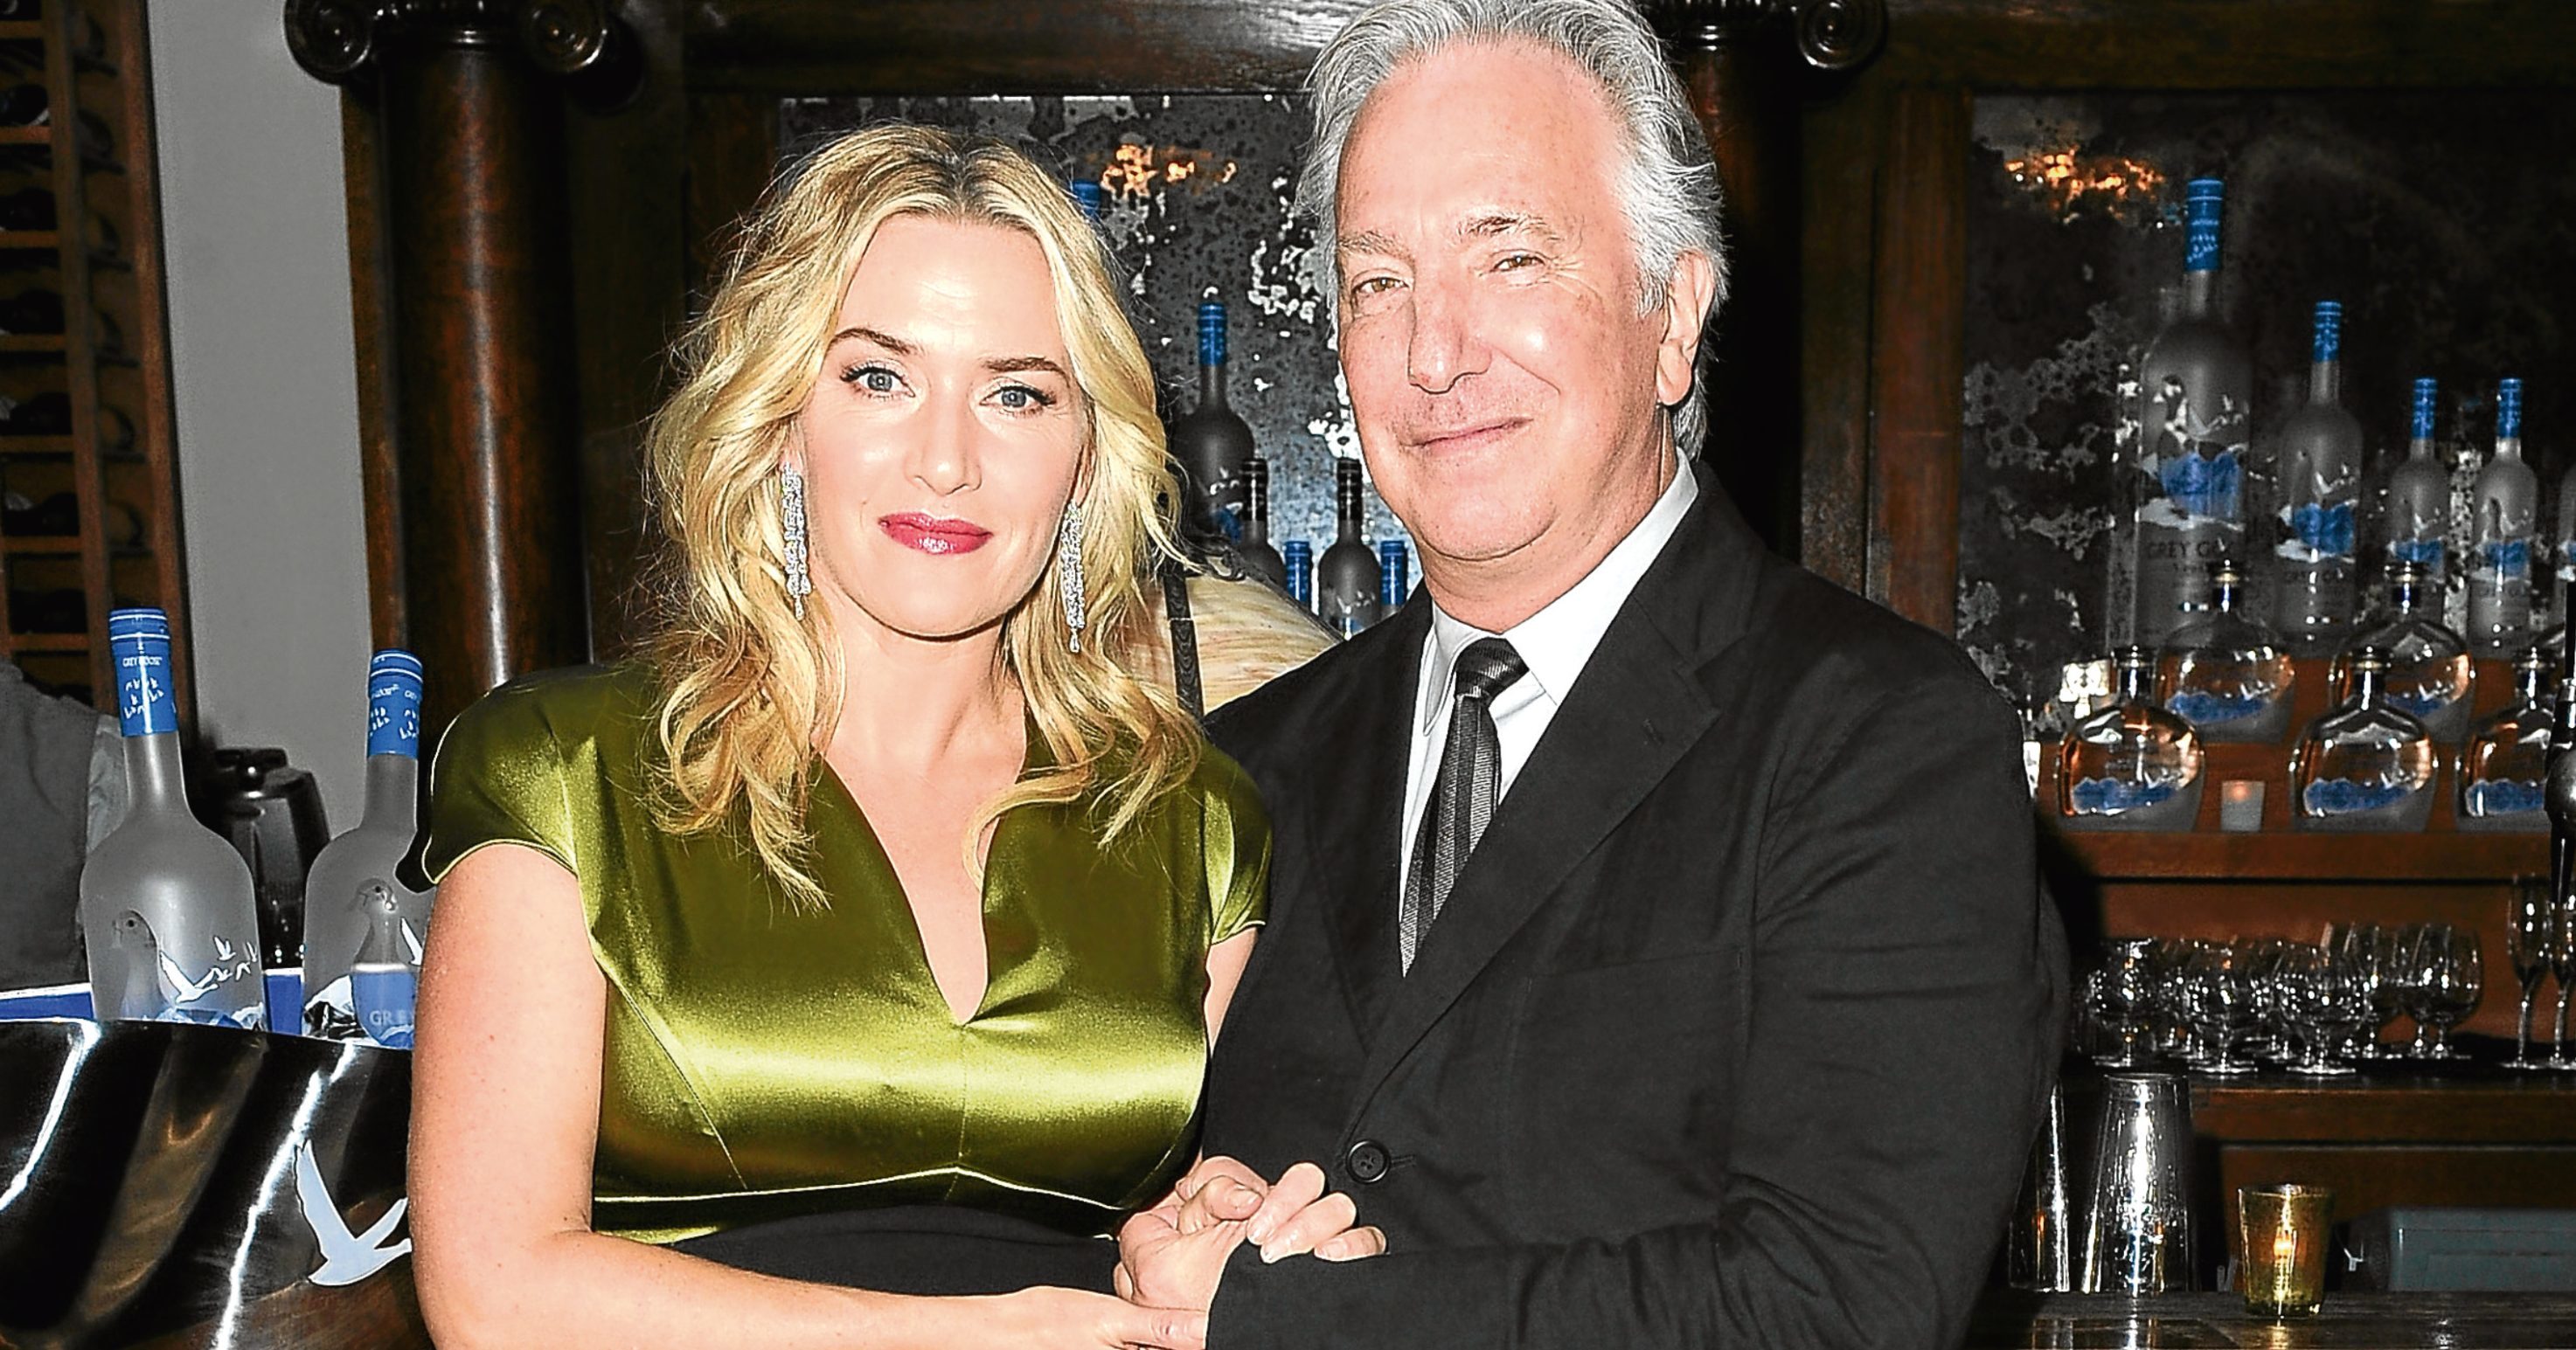 Alan Rickman brought his film A Little Chaos to the festival in 2015 (Photo by Ernesto Distefano/Getty Images for GREY GOOSE Vodka)